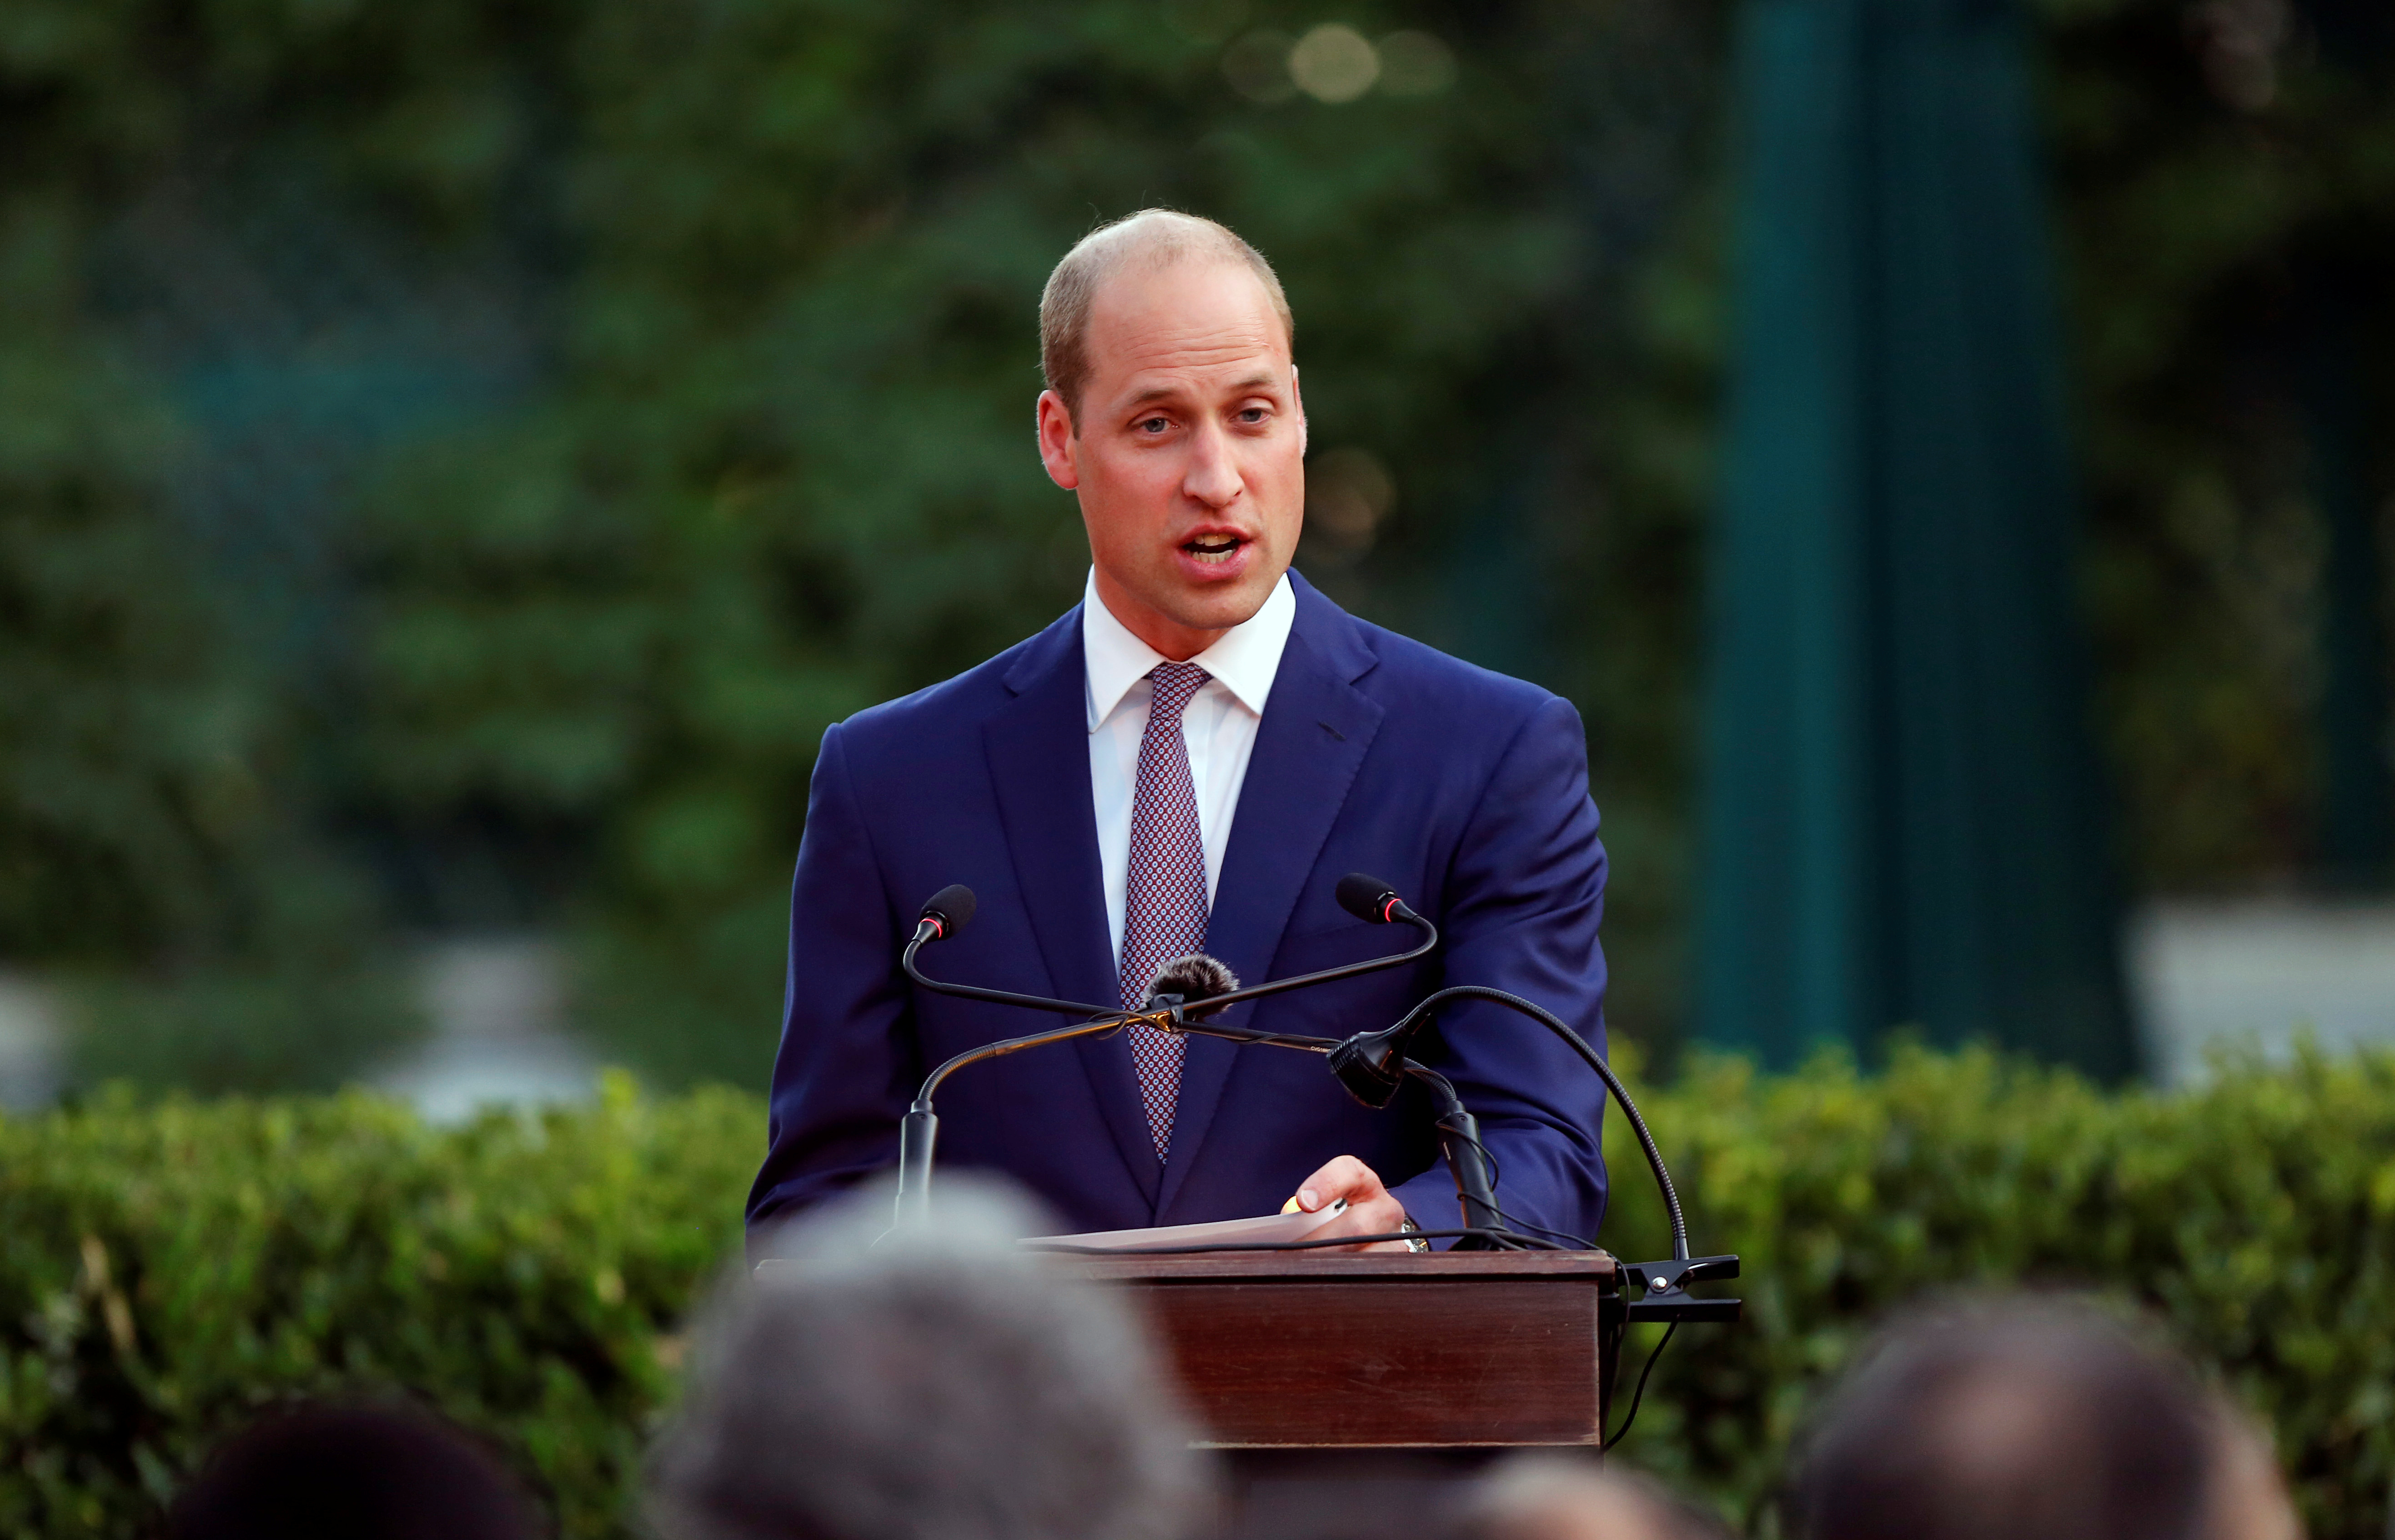 Britain's Prince William speaks during the birthday party of Britain's Queen Elizabeth, at the residence of British Ambassador to Jordan Edward Oakden, in Amman, Jordan, June 24, 2018. REUTERS/Muhammad Hamed - RC1E13BA2730